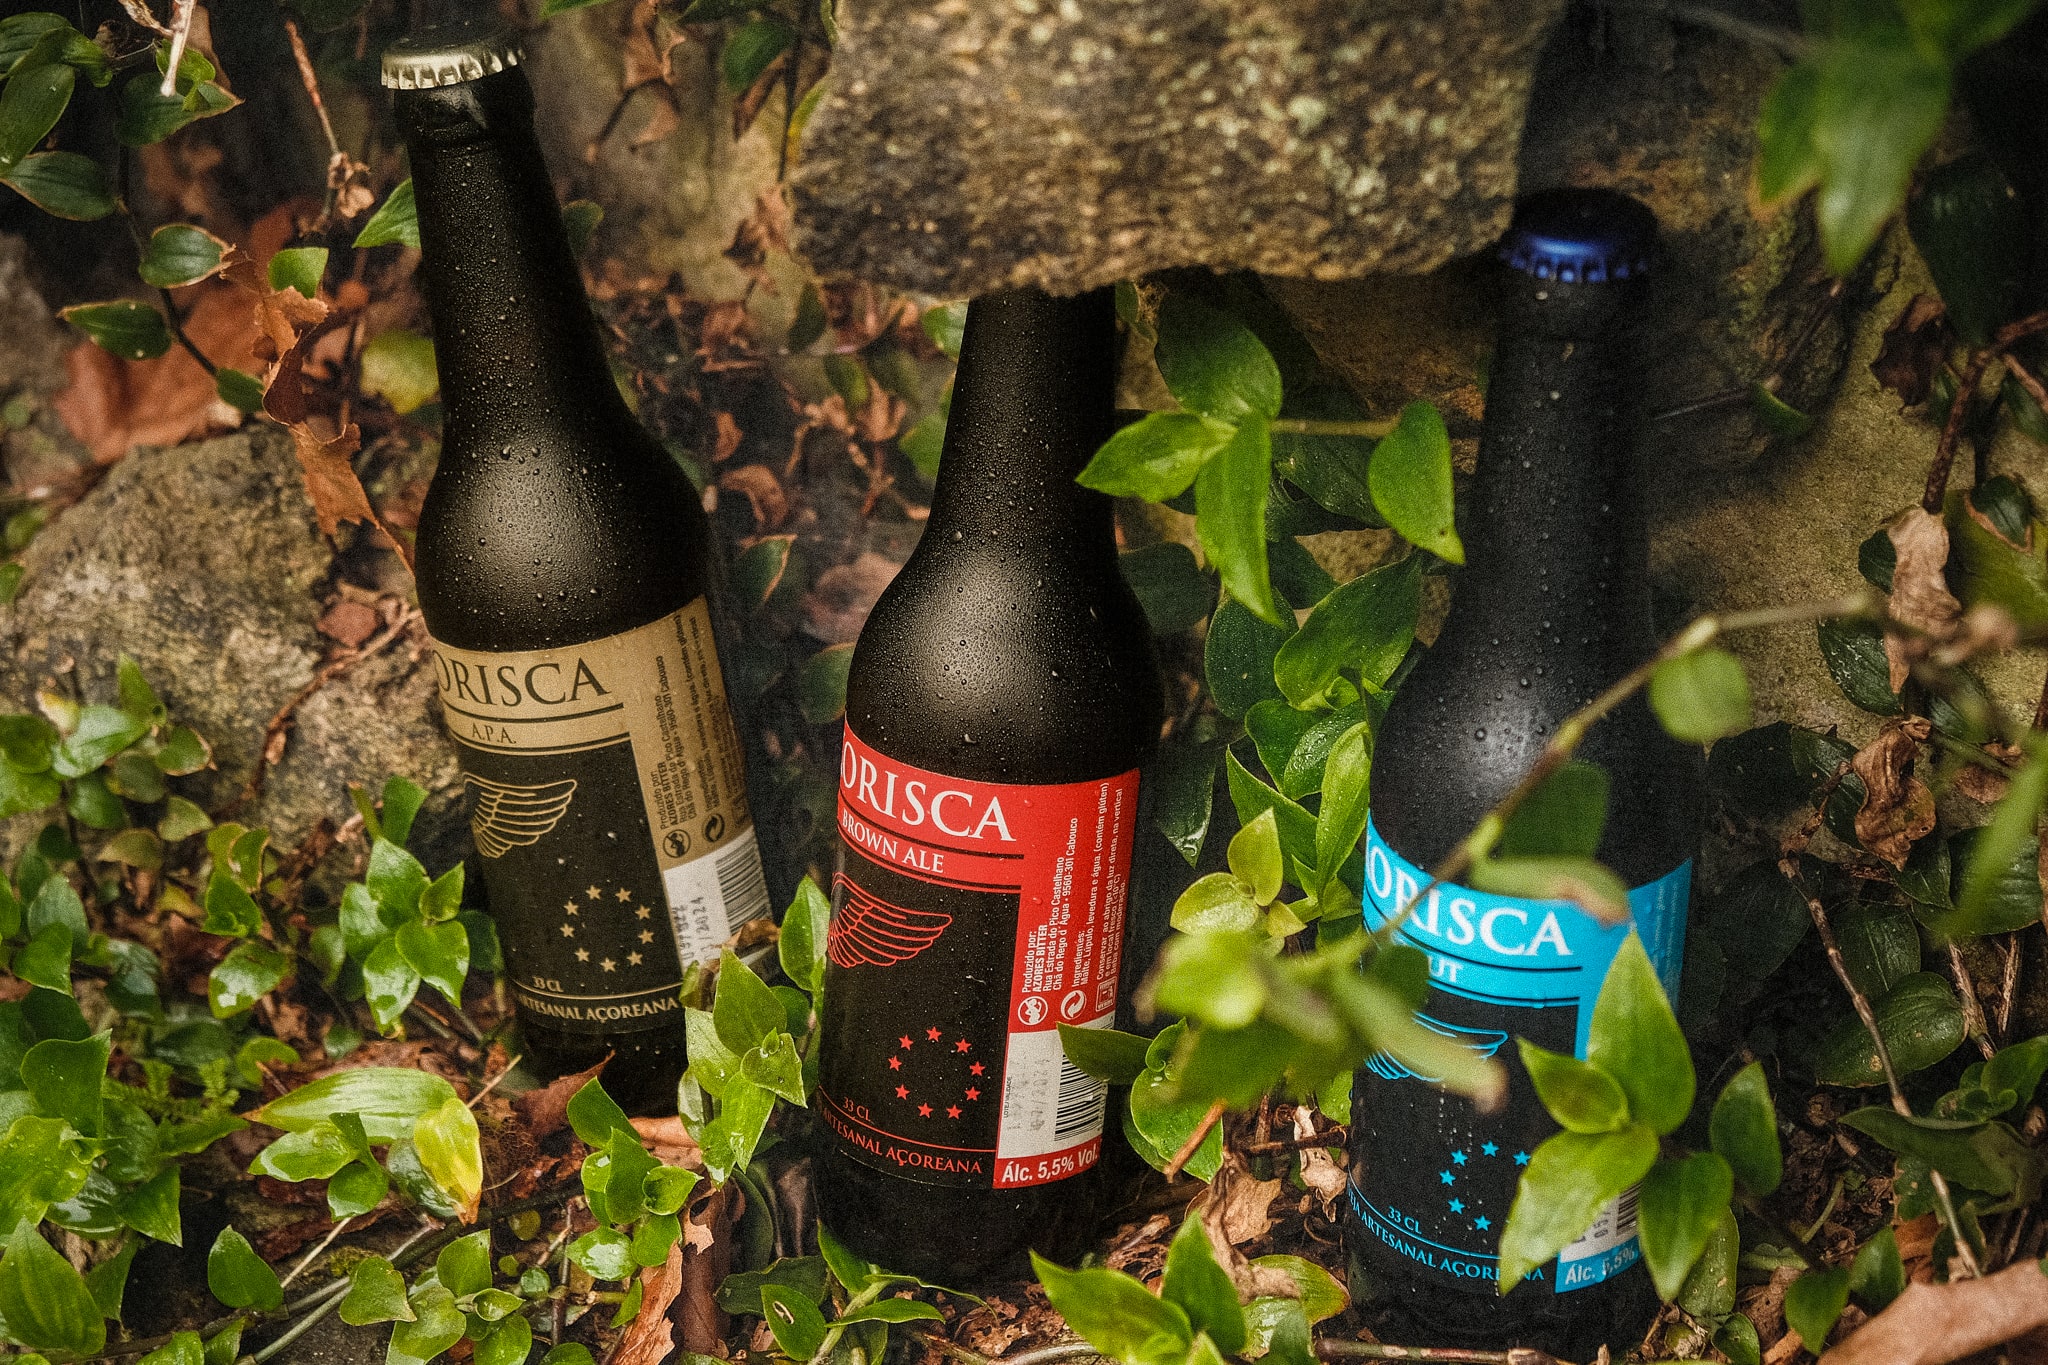 Azorean craft beer Korisca Clássica II (APA), Korisca Clássica I (Brown Ale) and Korisca Clássica III (Stout), surrounded by green plants and clear stone, island of São Miguel, Azores.